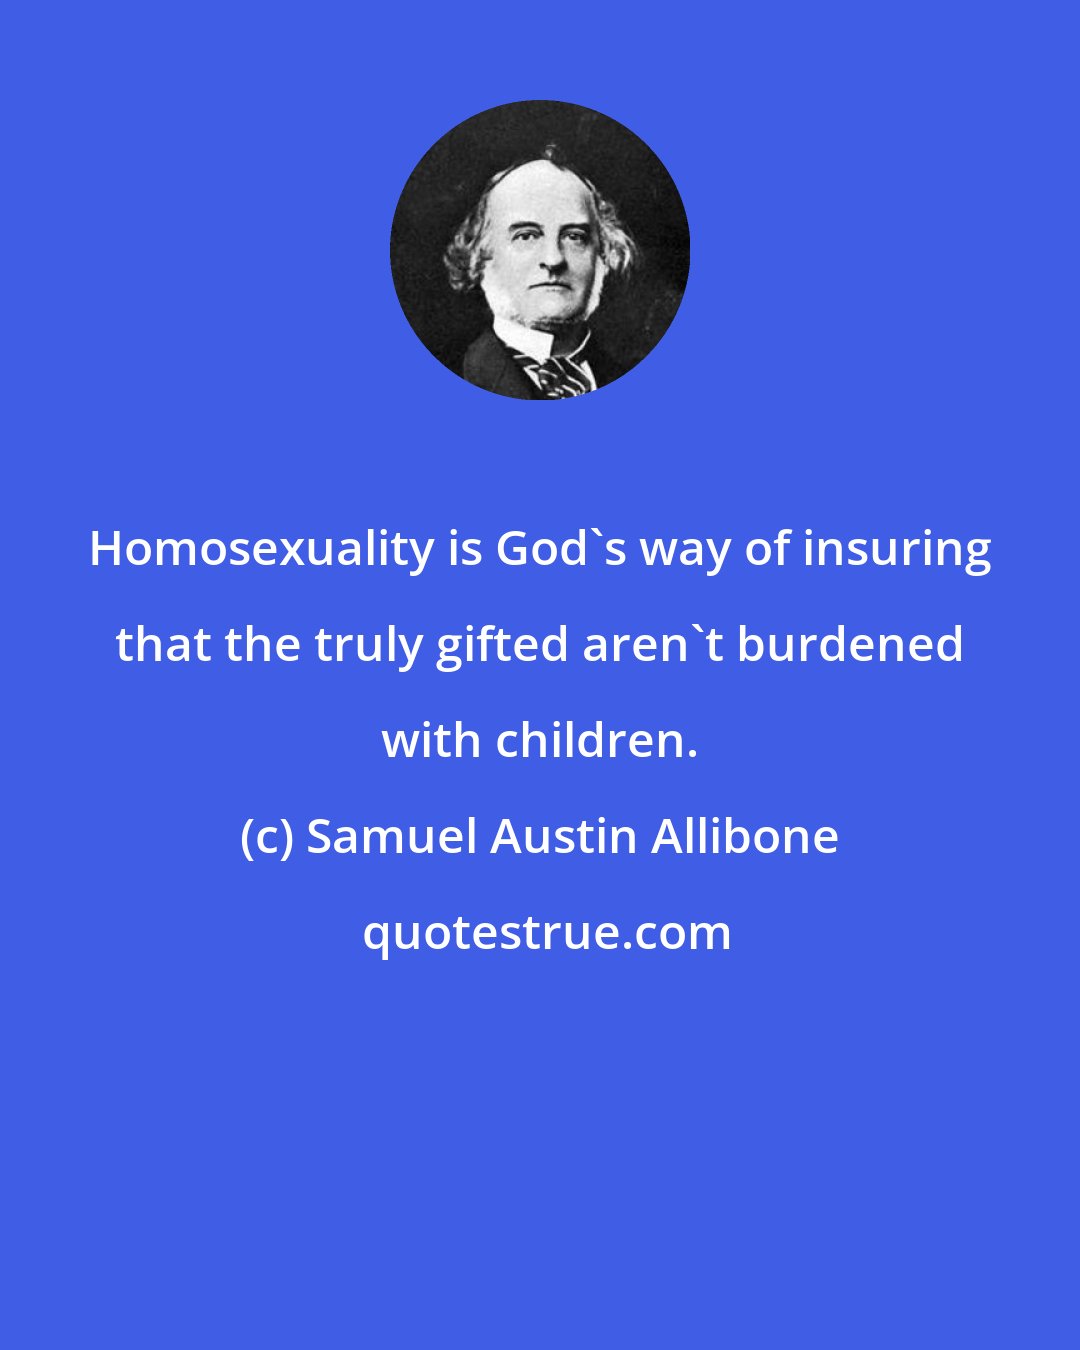 Samuel Austin Allibone: Homosexuality is God's way of insuring that the truly gifted aren't burdened with children.